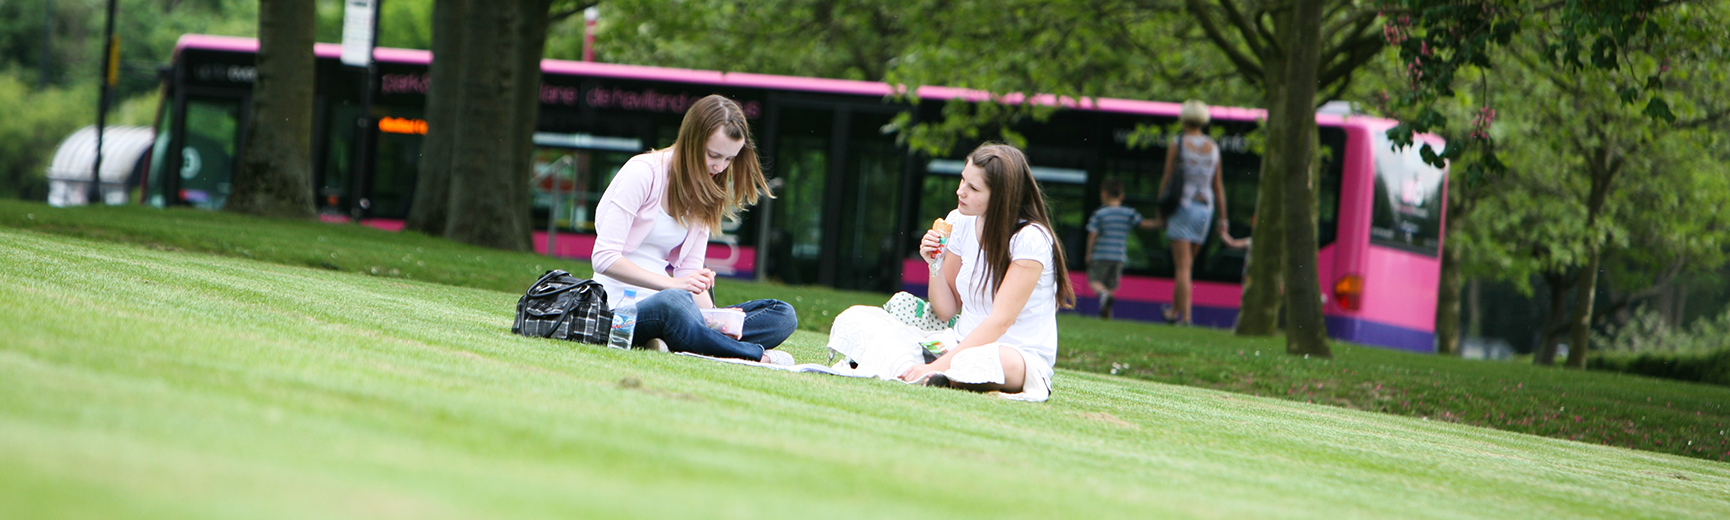 Students on grass mobile